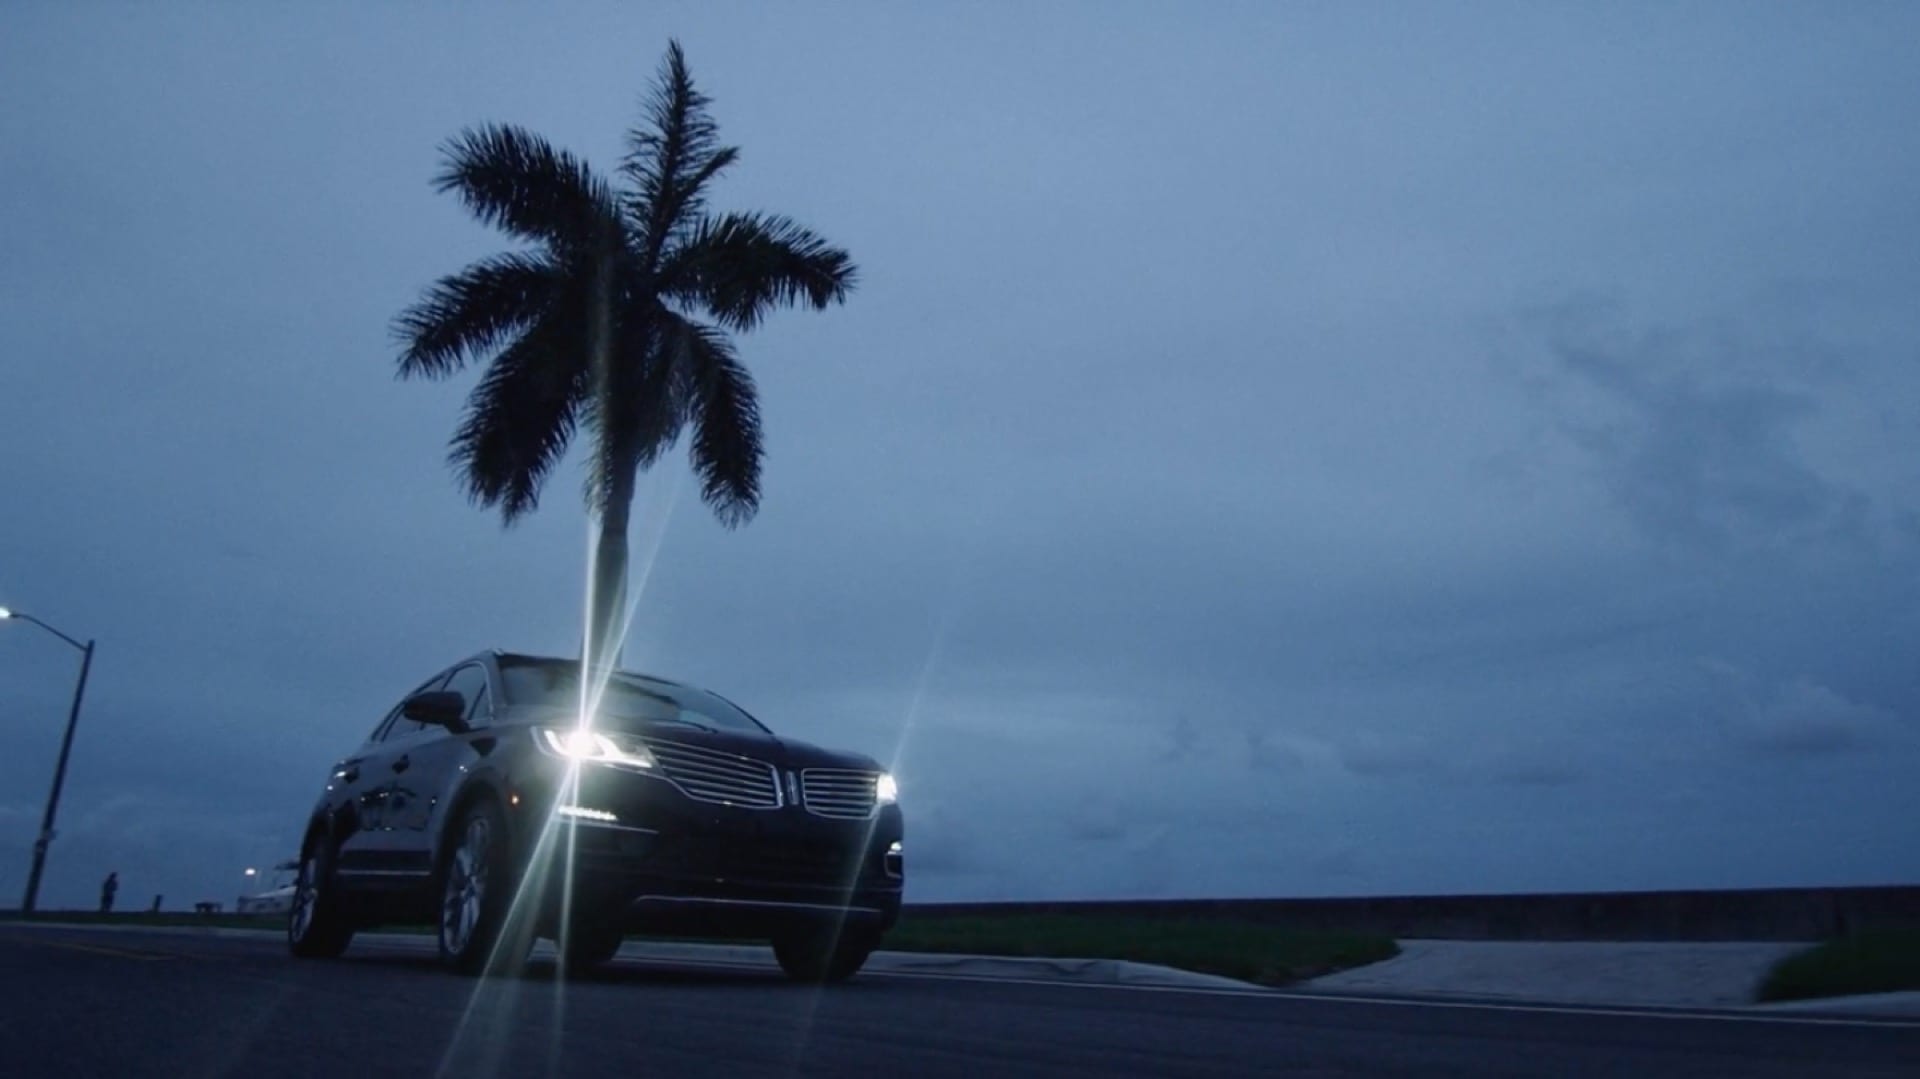 Lincoln Cars MKC & MKZ A Lincoln car on a Florida location by a palm tree at dusk